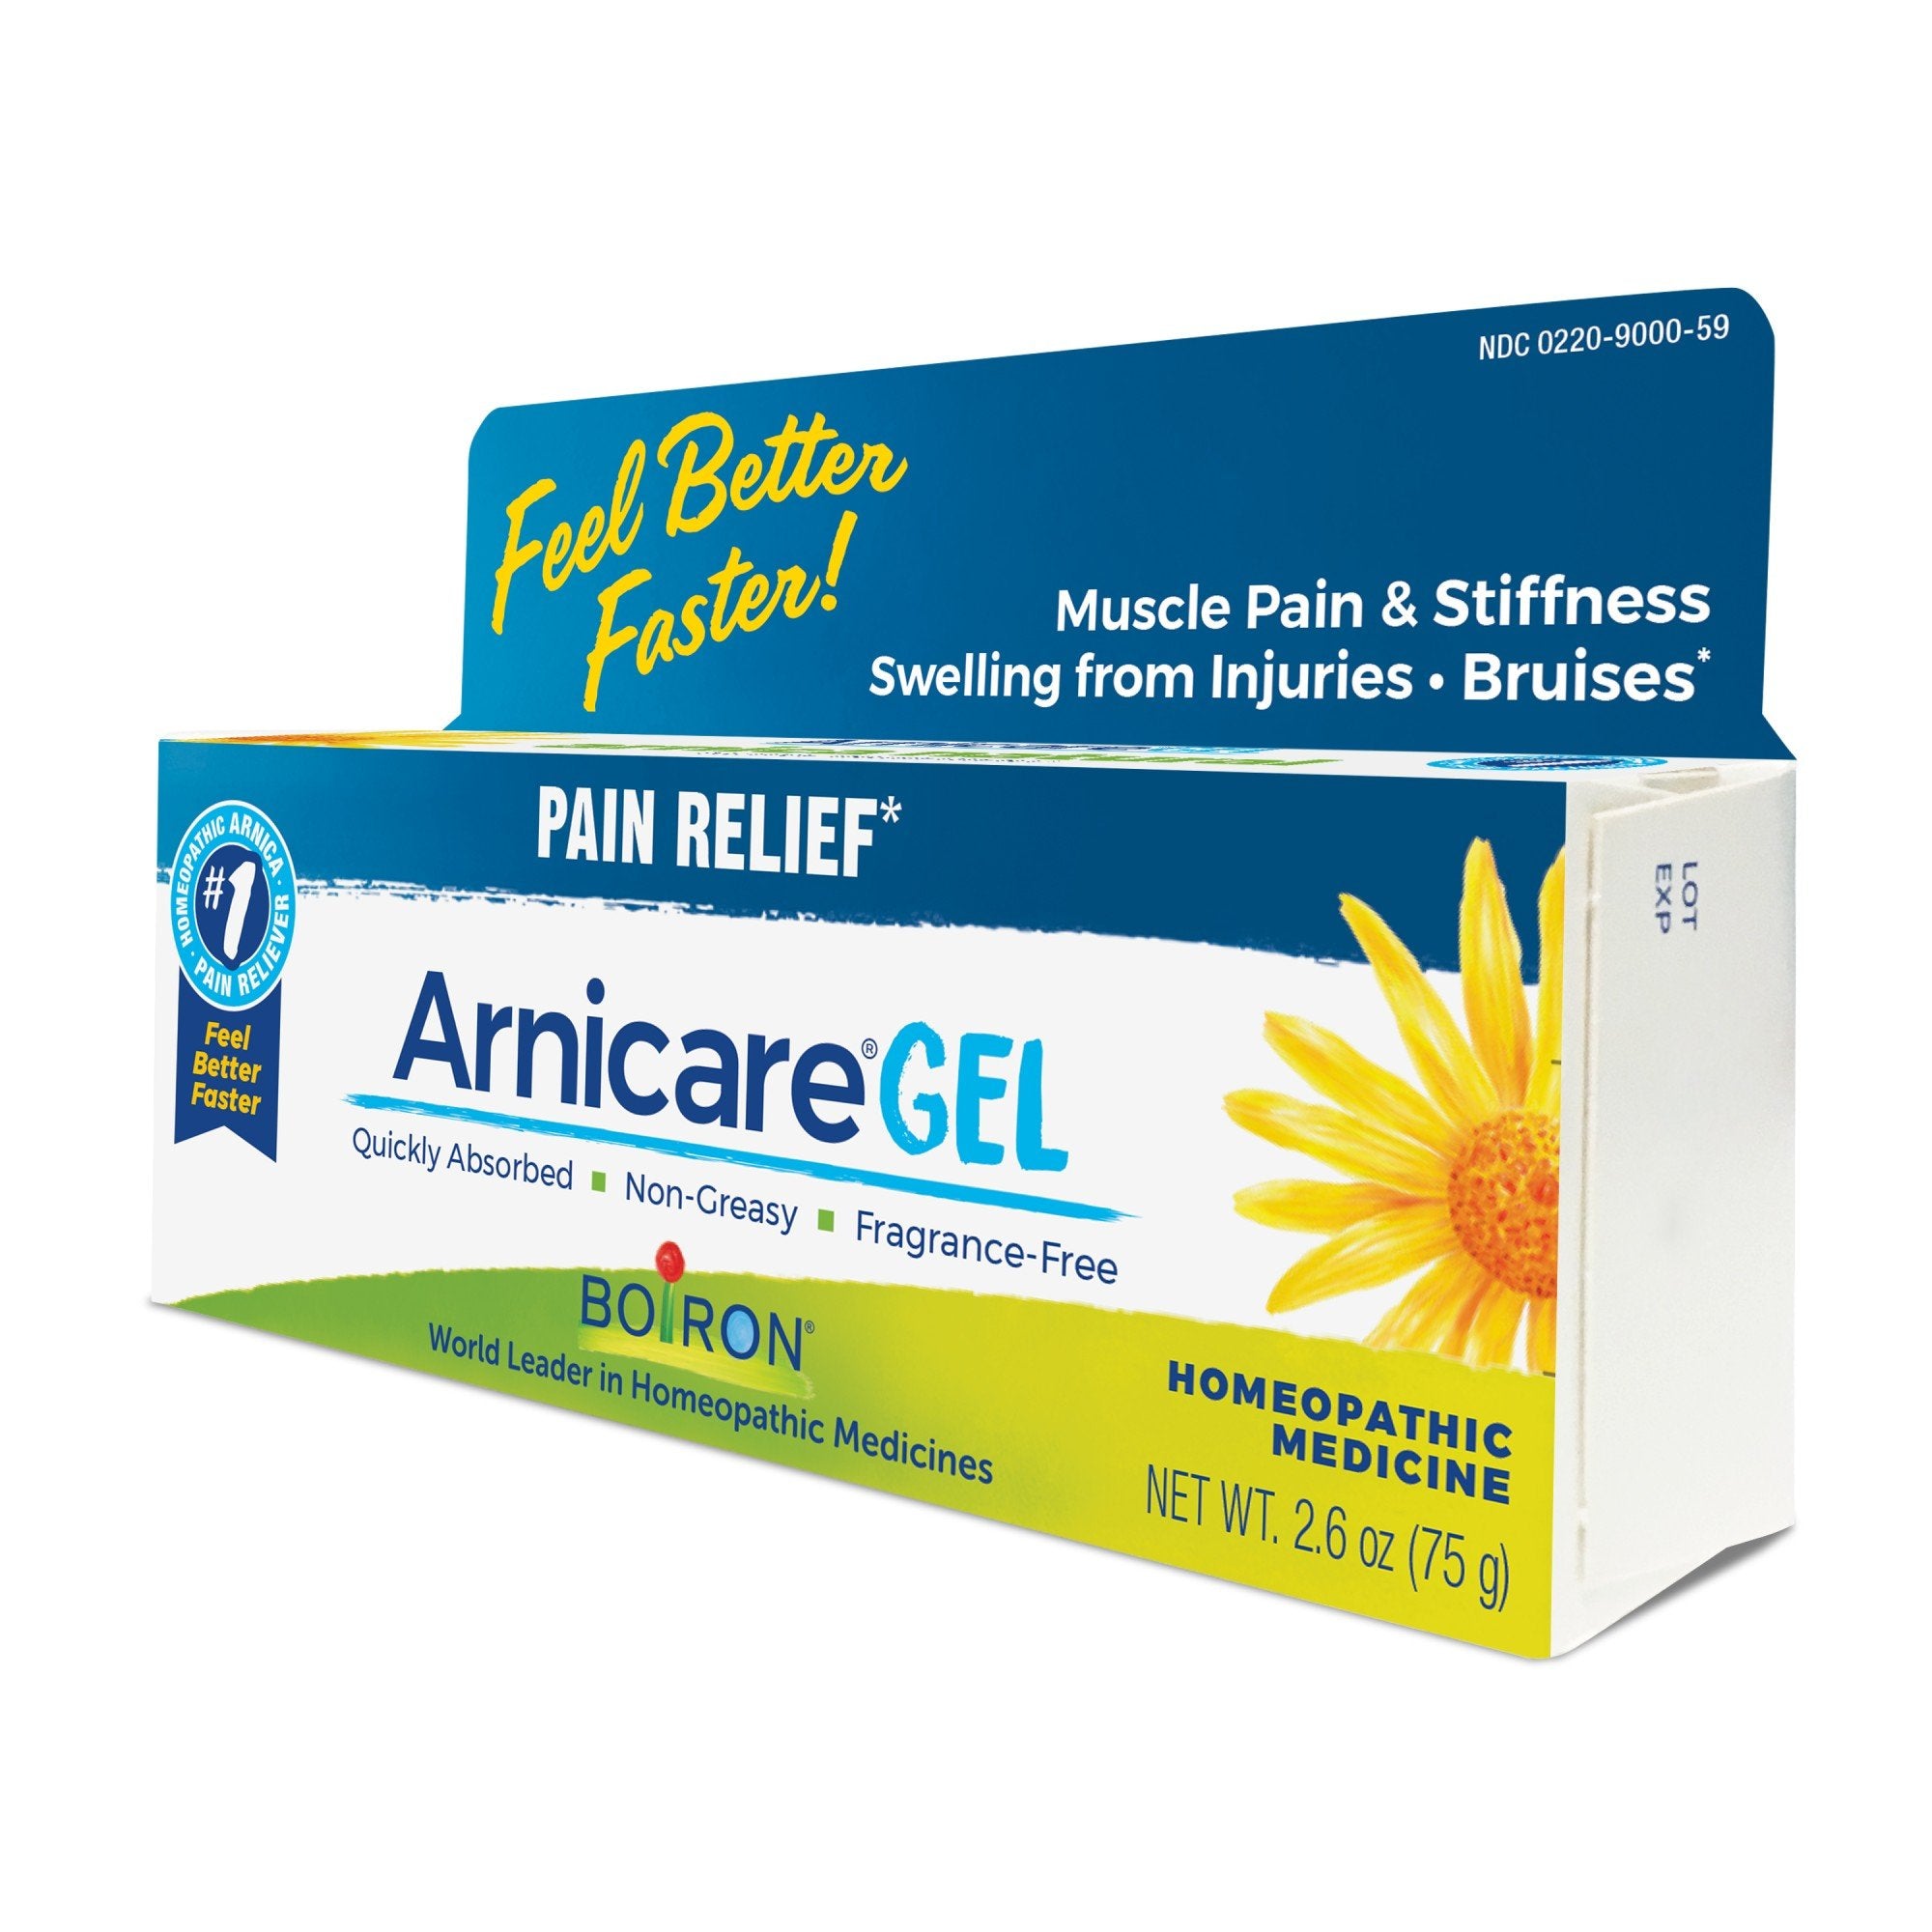 Arnicare Arnica Gel Pain Relief - 2.6 fl. oz. by Boiron (Pack of 1